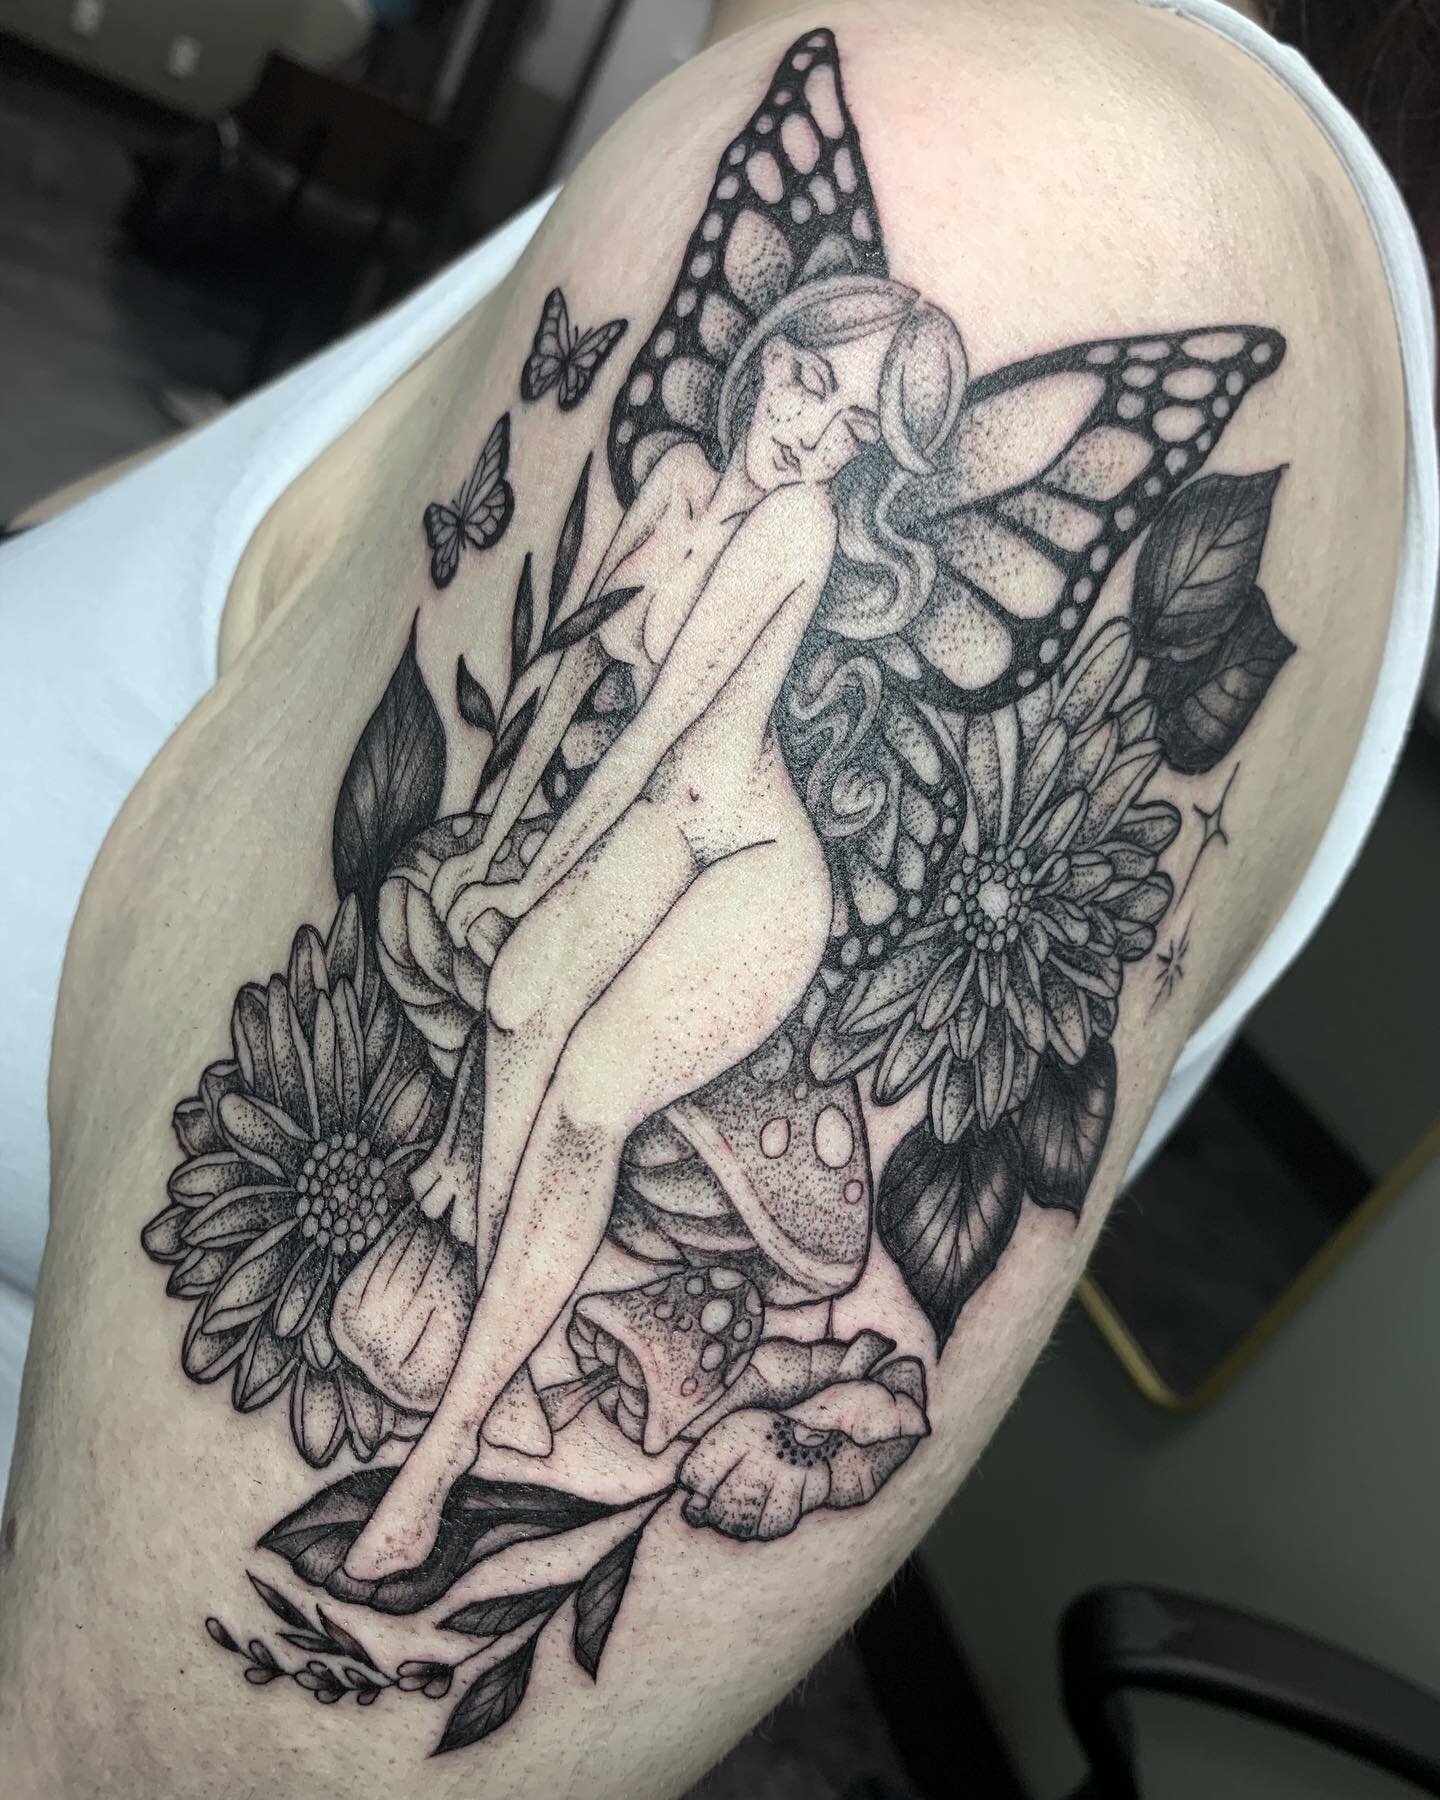 ✨Fairy lady done last night.✨taking bookings for June and July. Schedule change starting June: Tuesday Wednesday Friday Saturday (all by appointment only) for all inquires please email me.